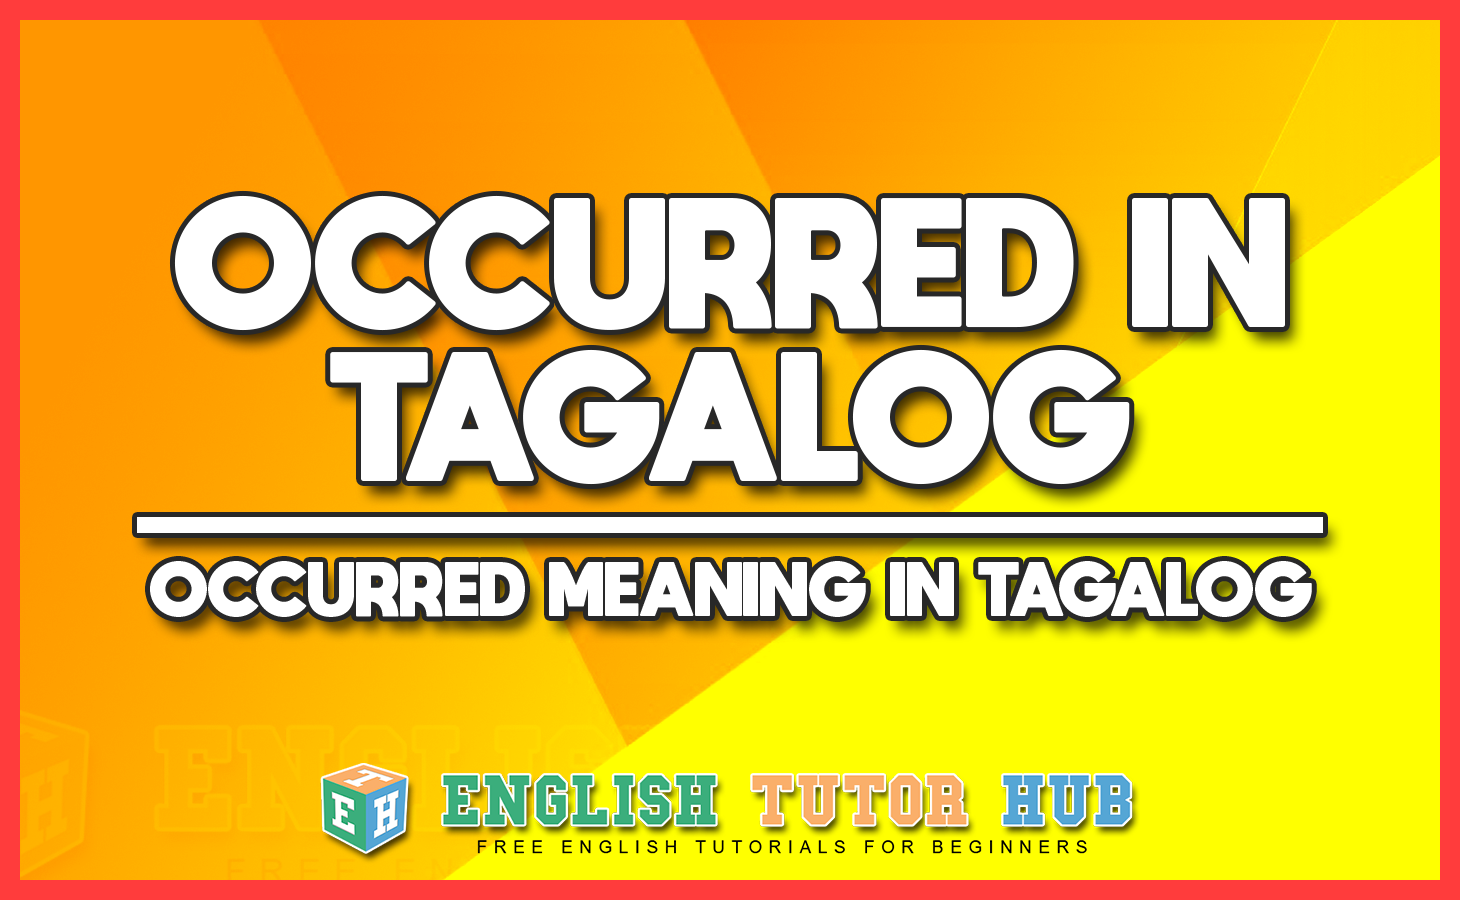 OCCURRED IN TAGALOG - OCCURRED MEANING IN TAGALOG